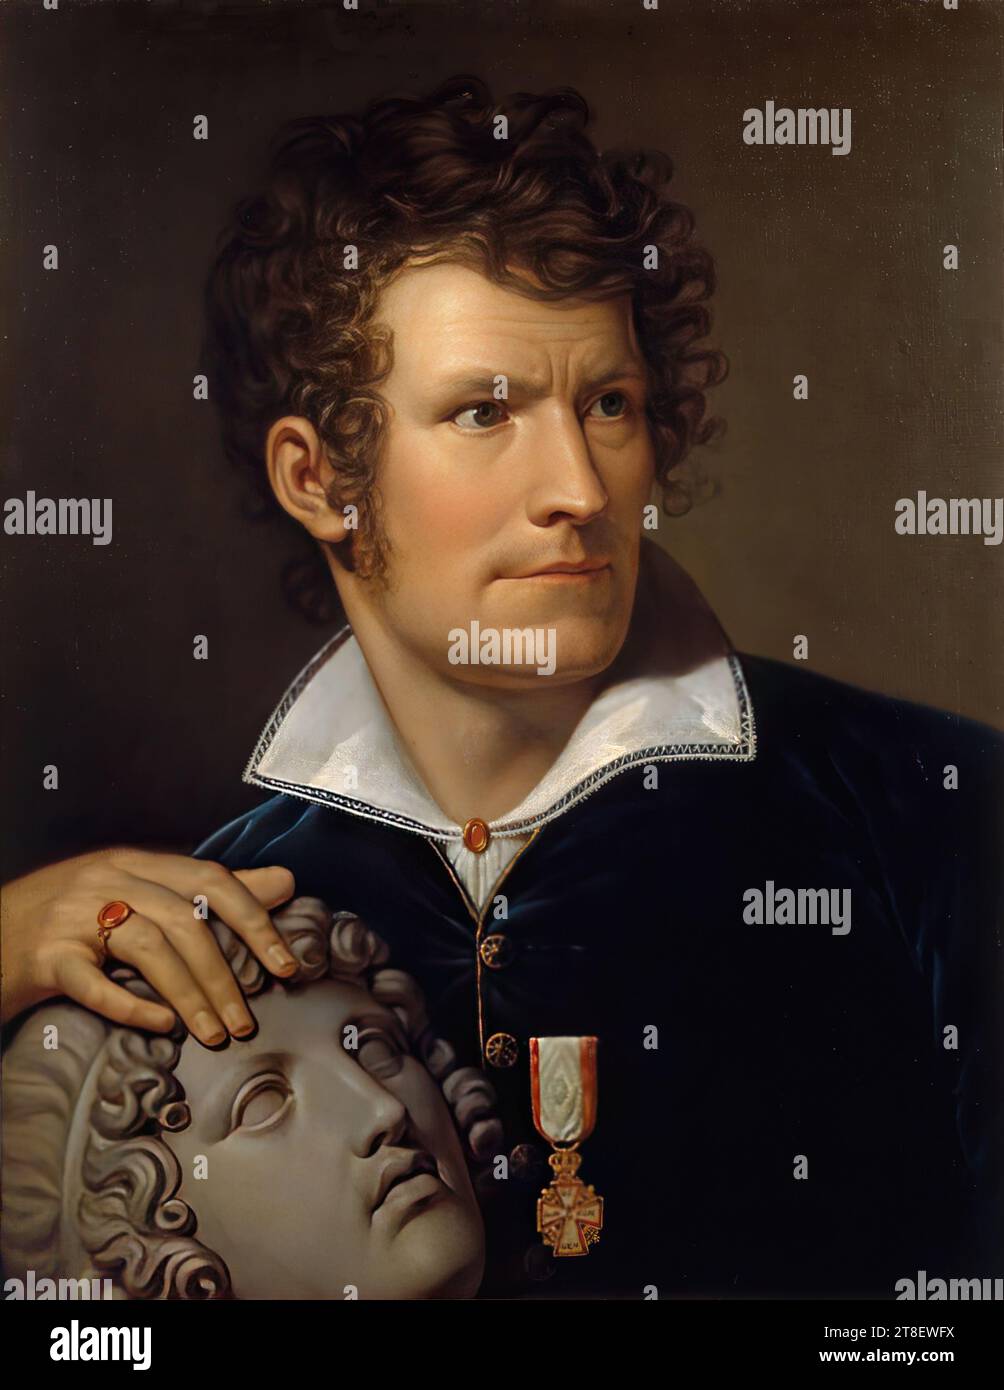 Portrait of Thorvaldsen, Rudolph Suhrlandt, 1781-1862, 1810, Painting, Portrait, The German painter Rudolph Suhrlandt was in Rome 1808-1816. While there he painted the portraits of a number of artists belonging to the German artists’ colony, but also one of Thorvaldsen, who is here portrayed as a dynamic, self-assured figure. Nor had Thorvaldsen any reason to hide his light under a bushel. He had in 1805 been given the title of professor in the Royal Danish Academy of Fine Arts at Copenhagen and in 1808 in the S. Luca Academy in Rome., Textile, Canvas, Color, Oil paint, Painted Stock Photo